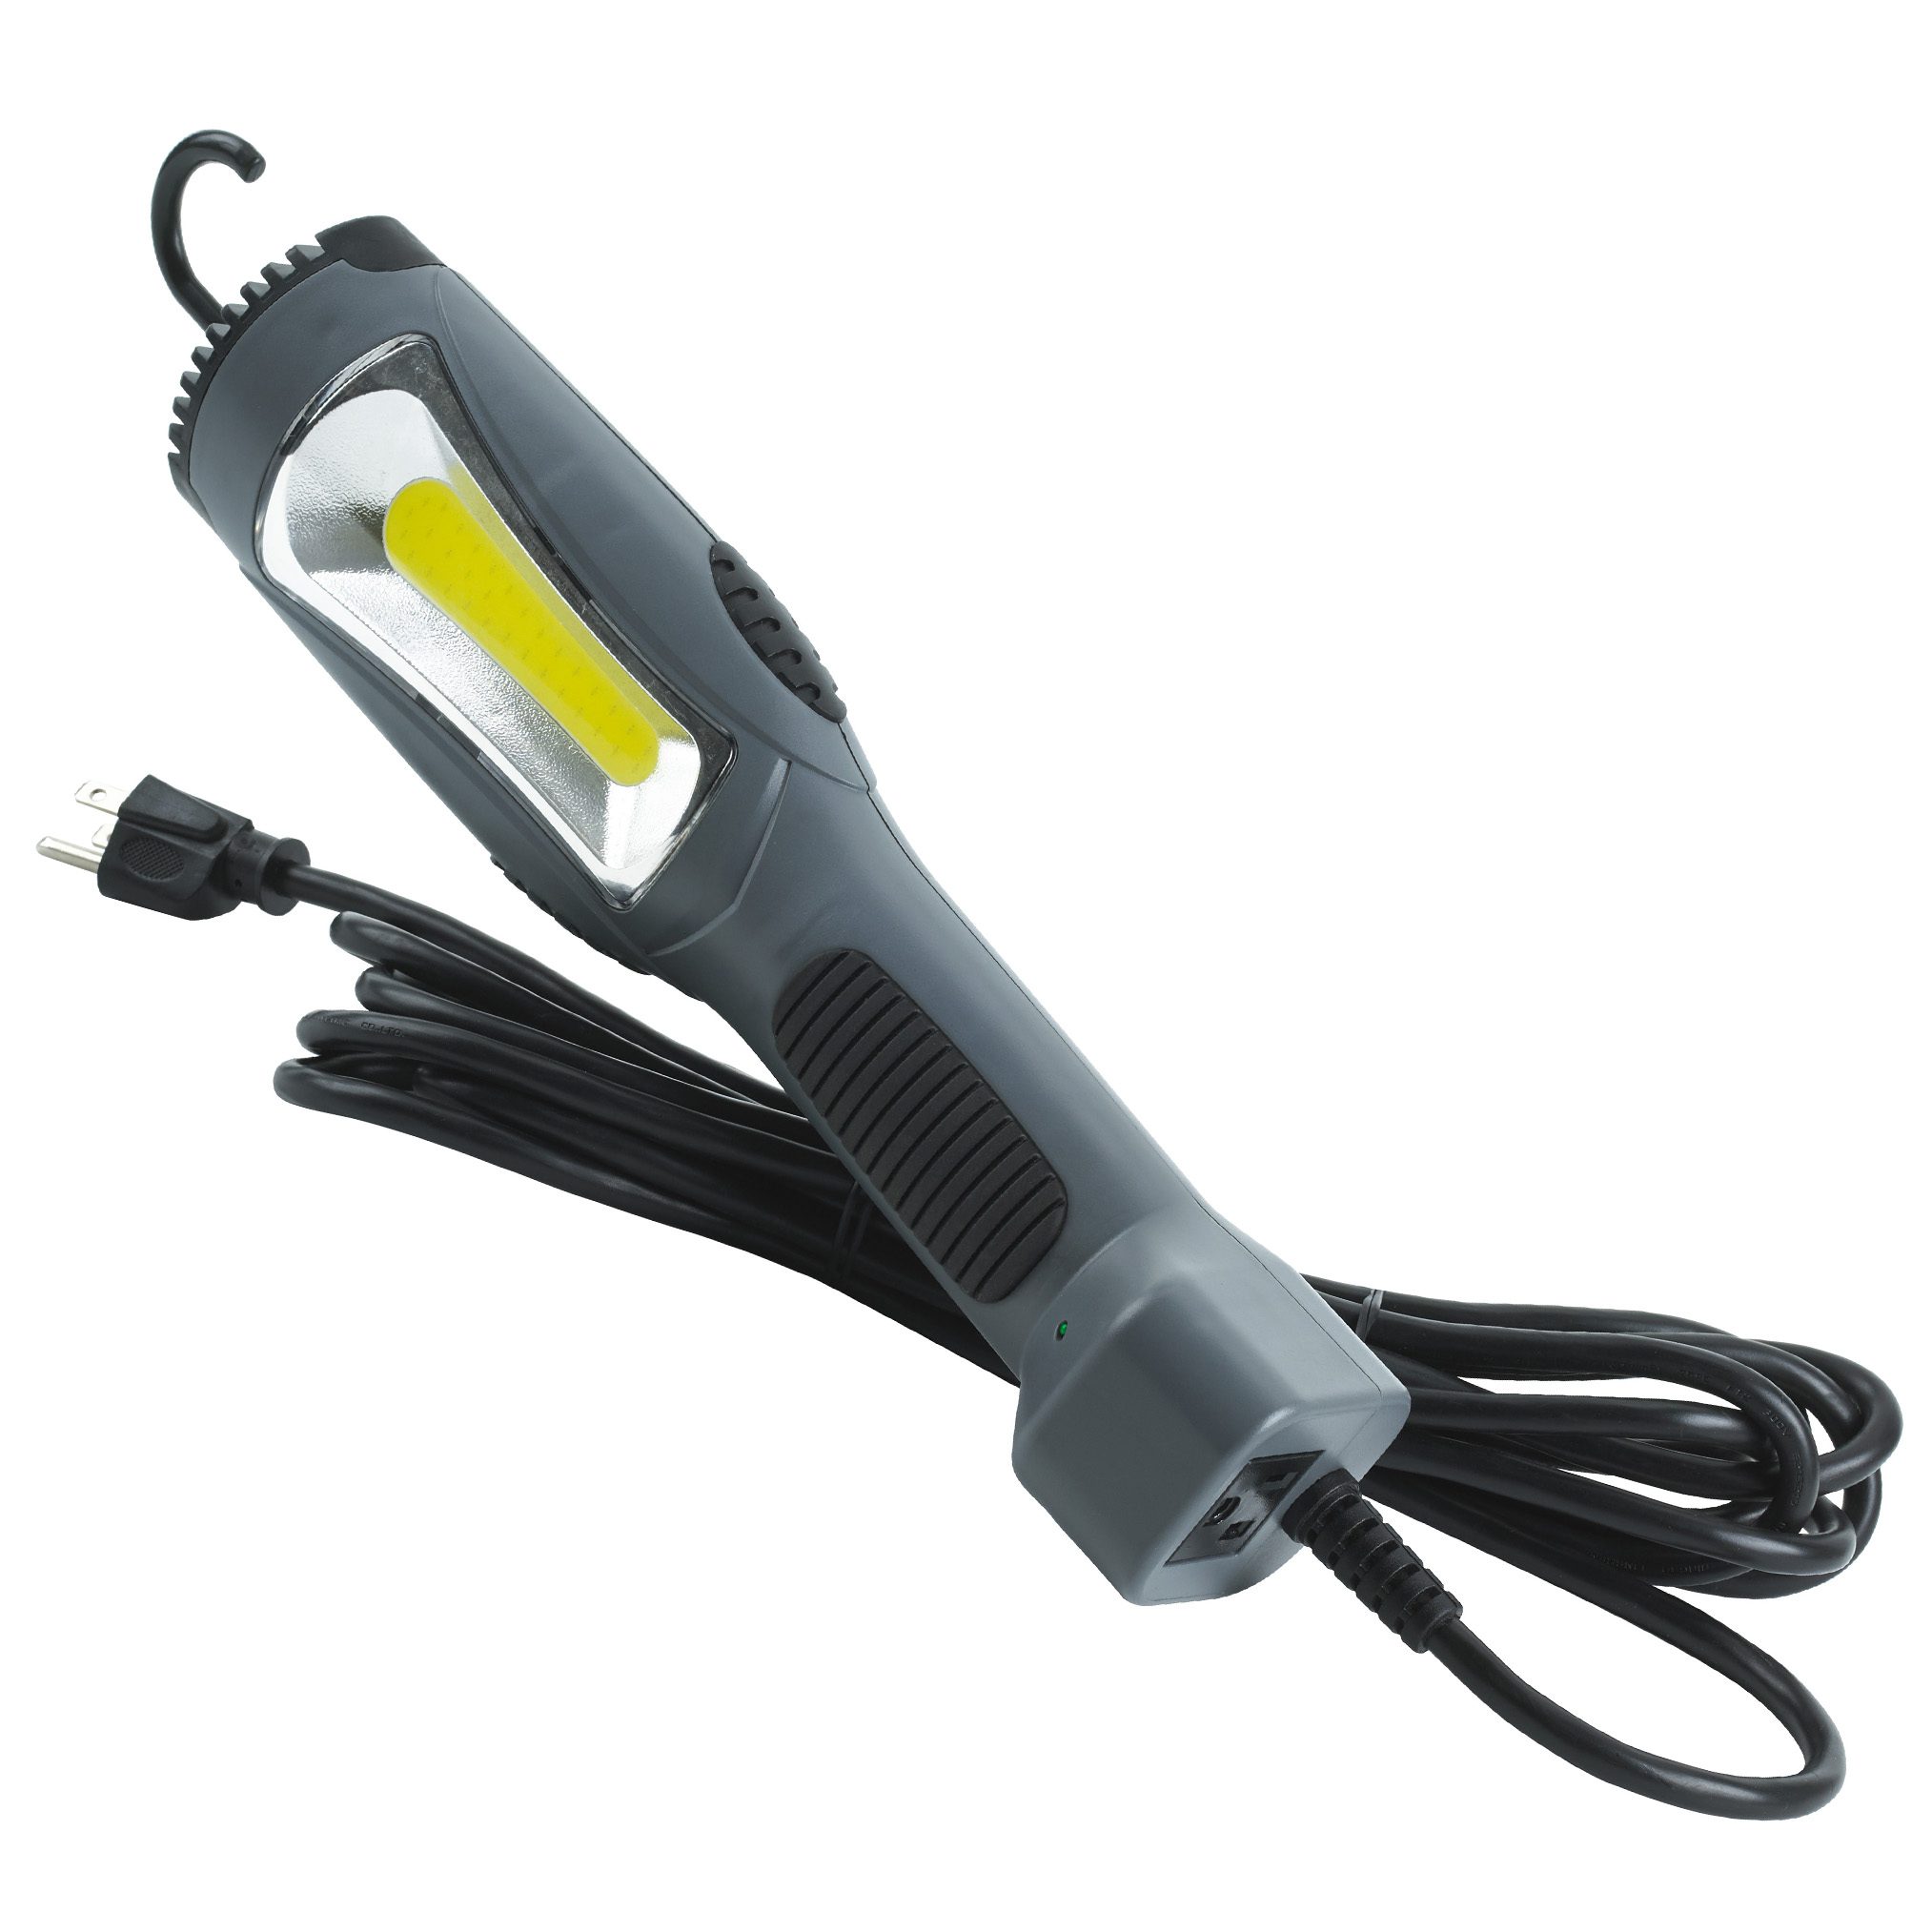 Corded Work Lights, Lighting, Products